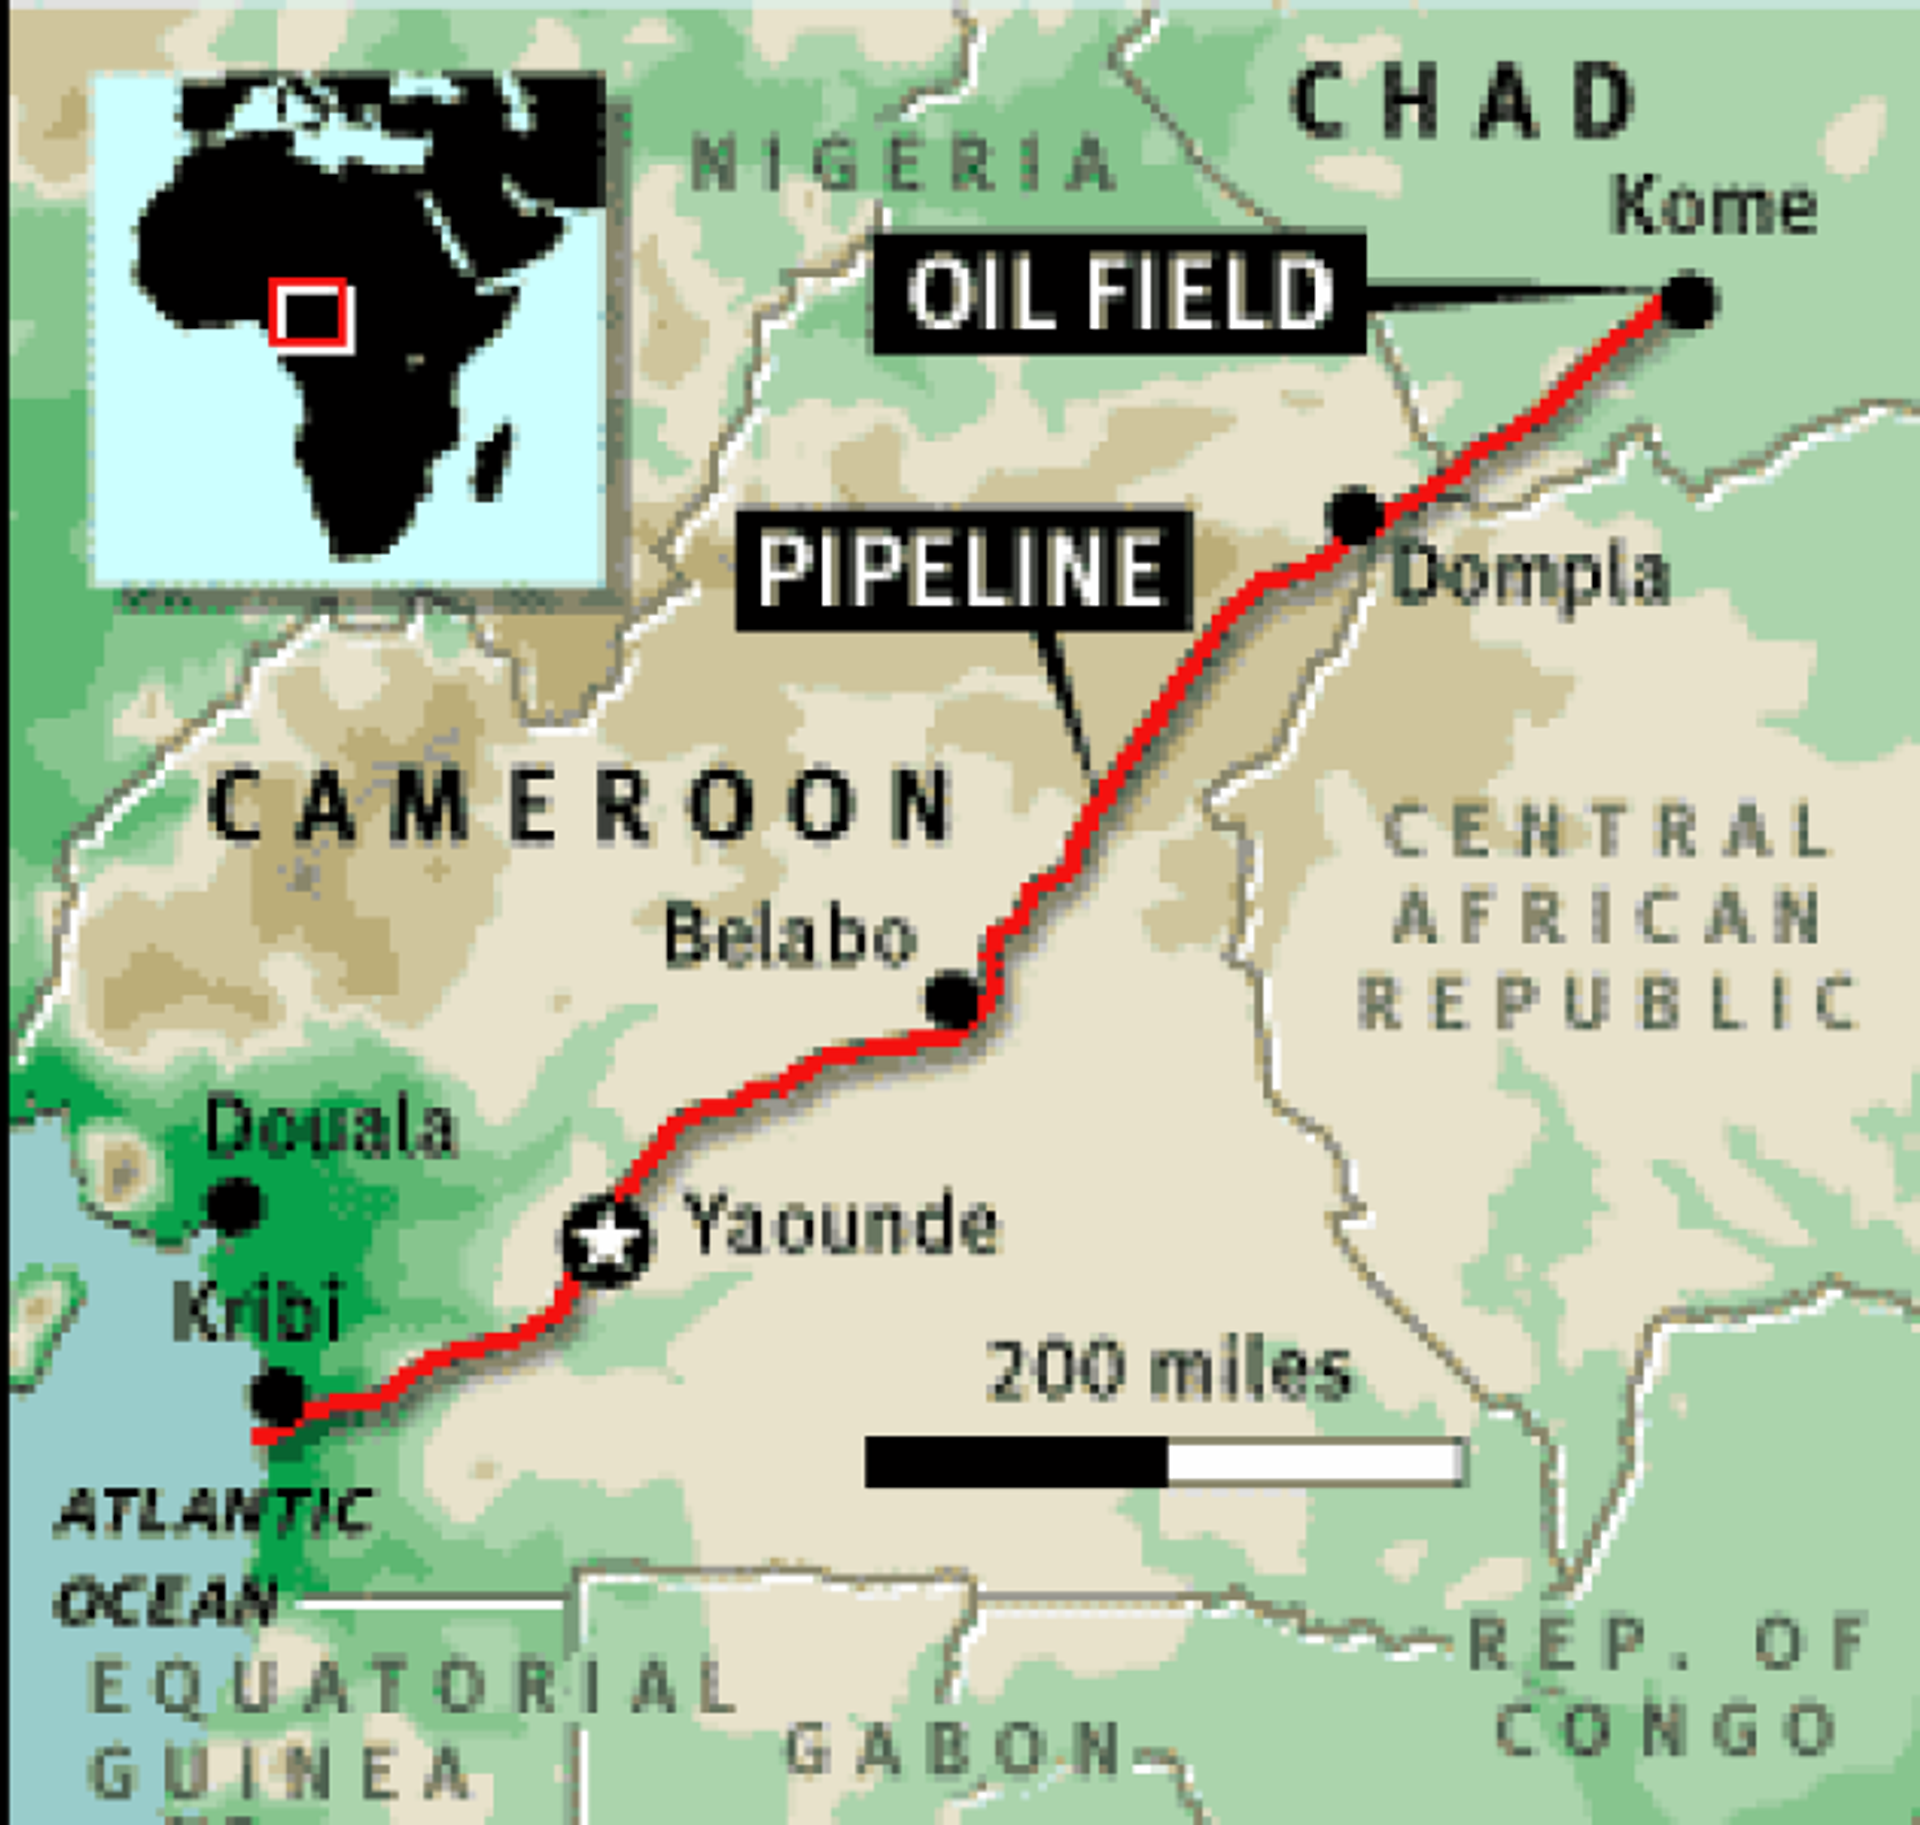 The Chad–Cameroon Petroleum Development and Pipeline Project, built by a consortium of ExxonMobil, Chevron and Petronas, and completed in 2003. - Sputnik International, 1920, 24.08.2022